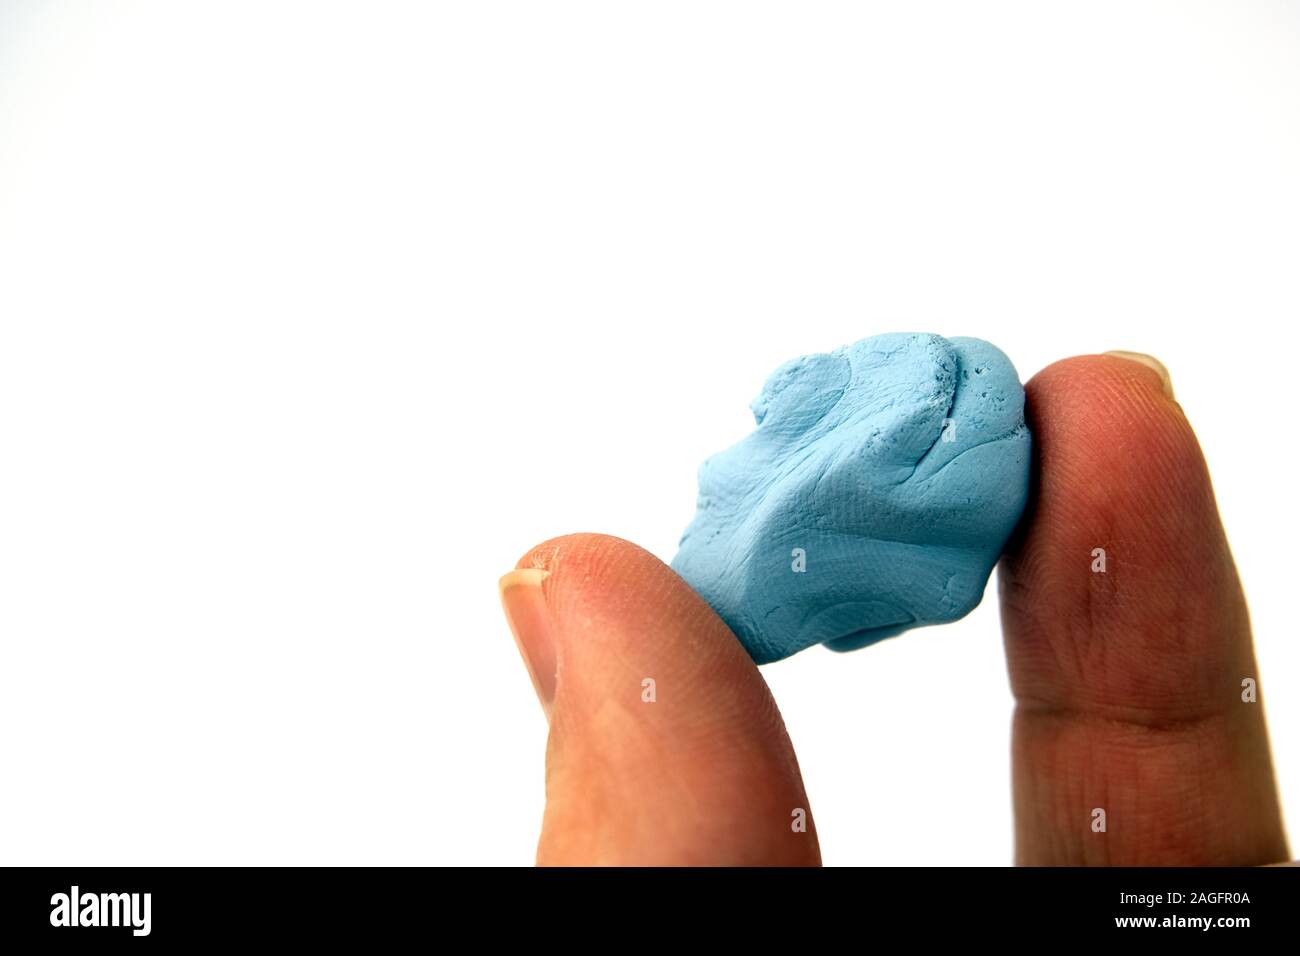 Blu Tack hold in hand. Close up photo of reusable and pressure sensitive adhesive paste commonly used to attach lightweight objects to walls. Stock Photo